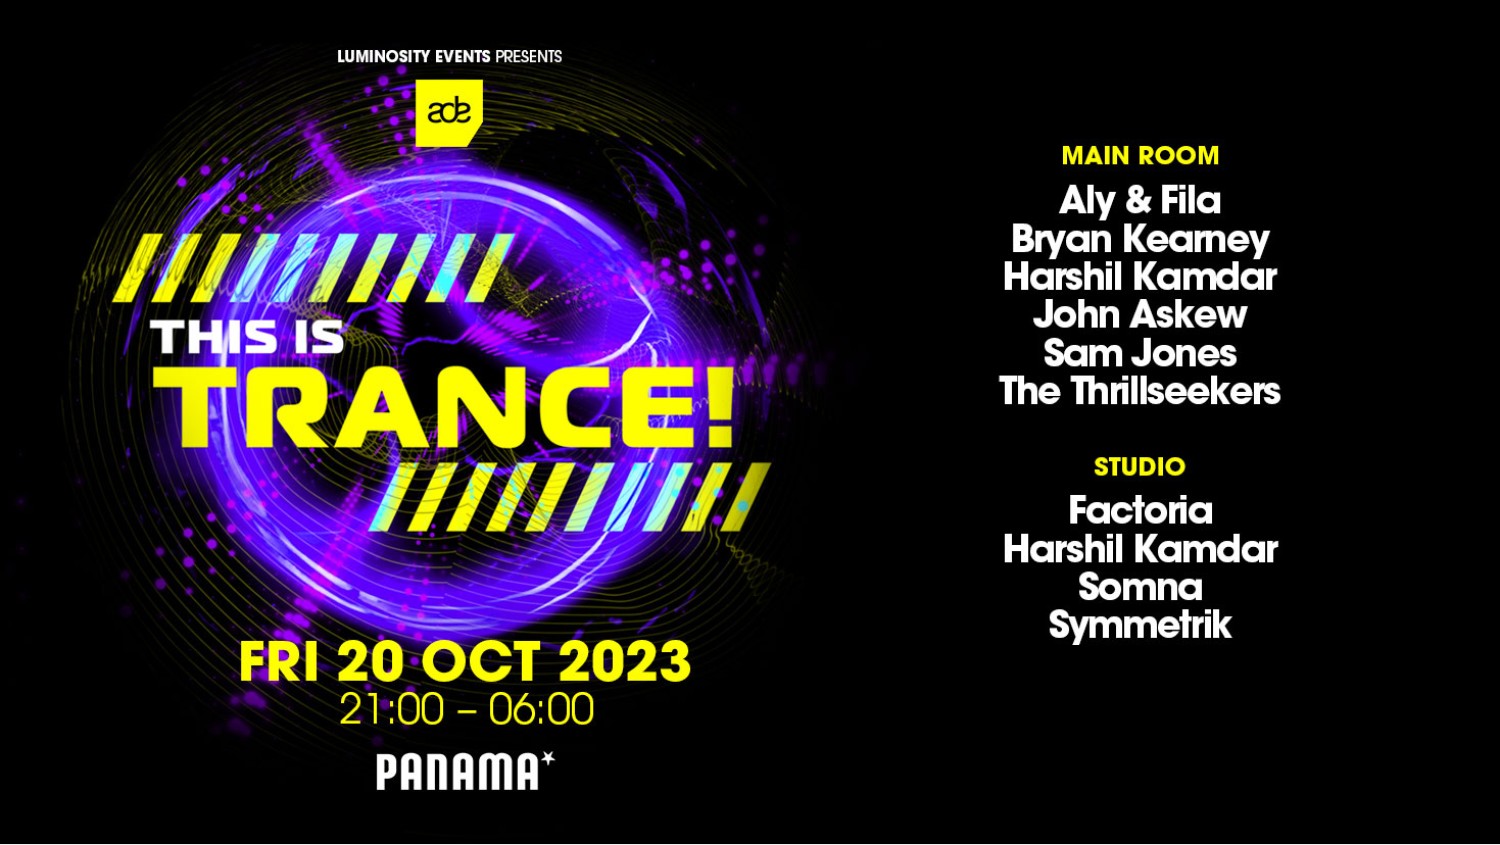 Luminosity presents This is Trance